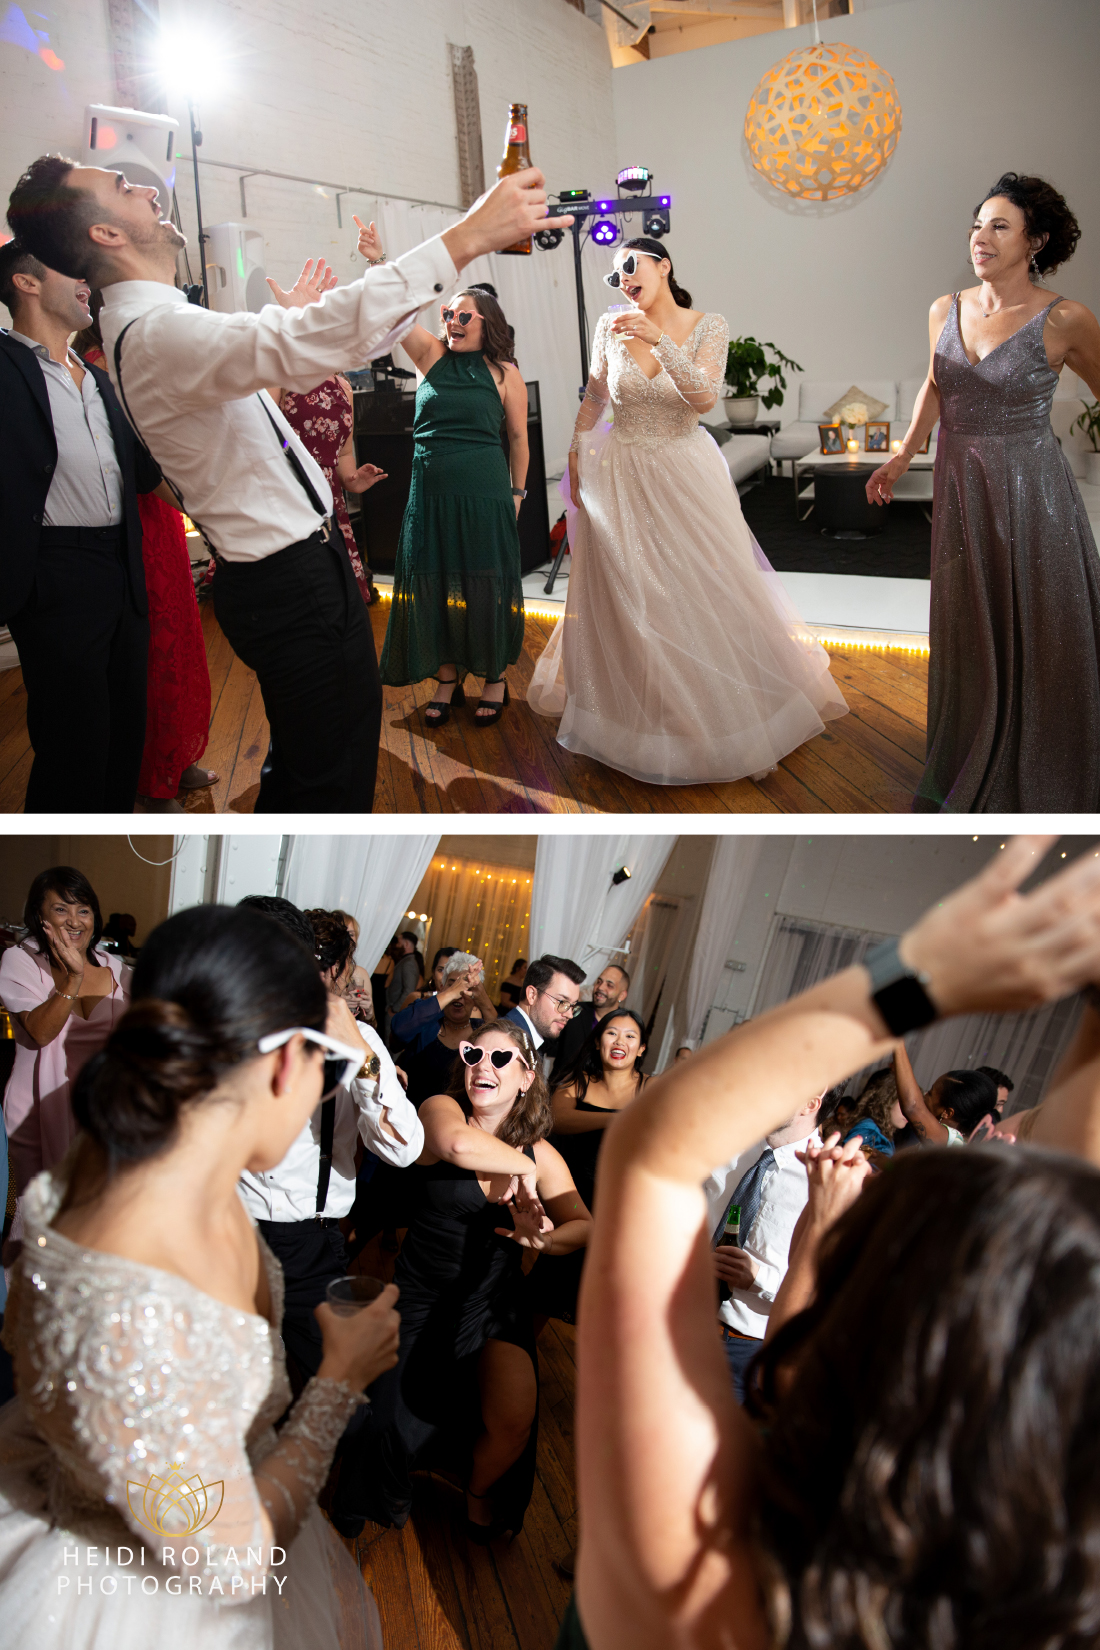 Philadelphia Bride and groom singing on the dance floor surrounded by their loved ones